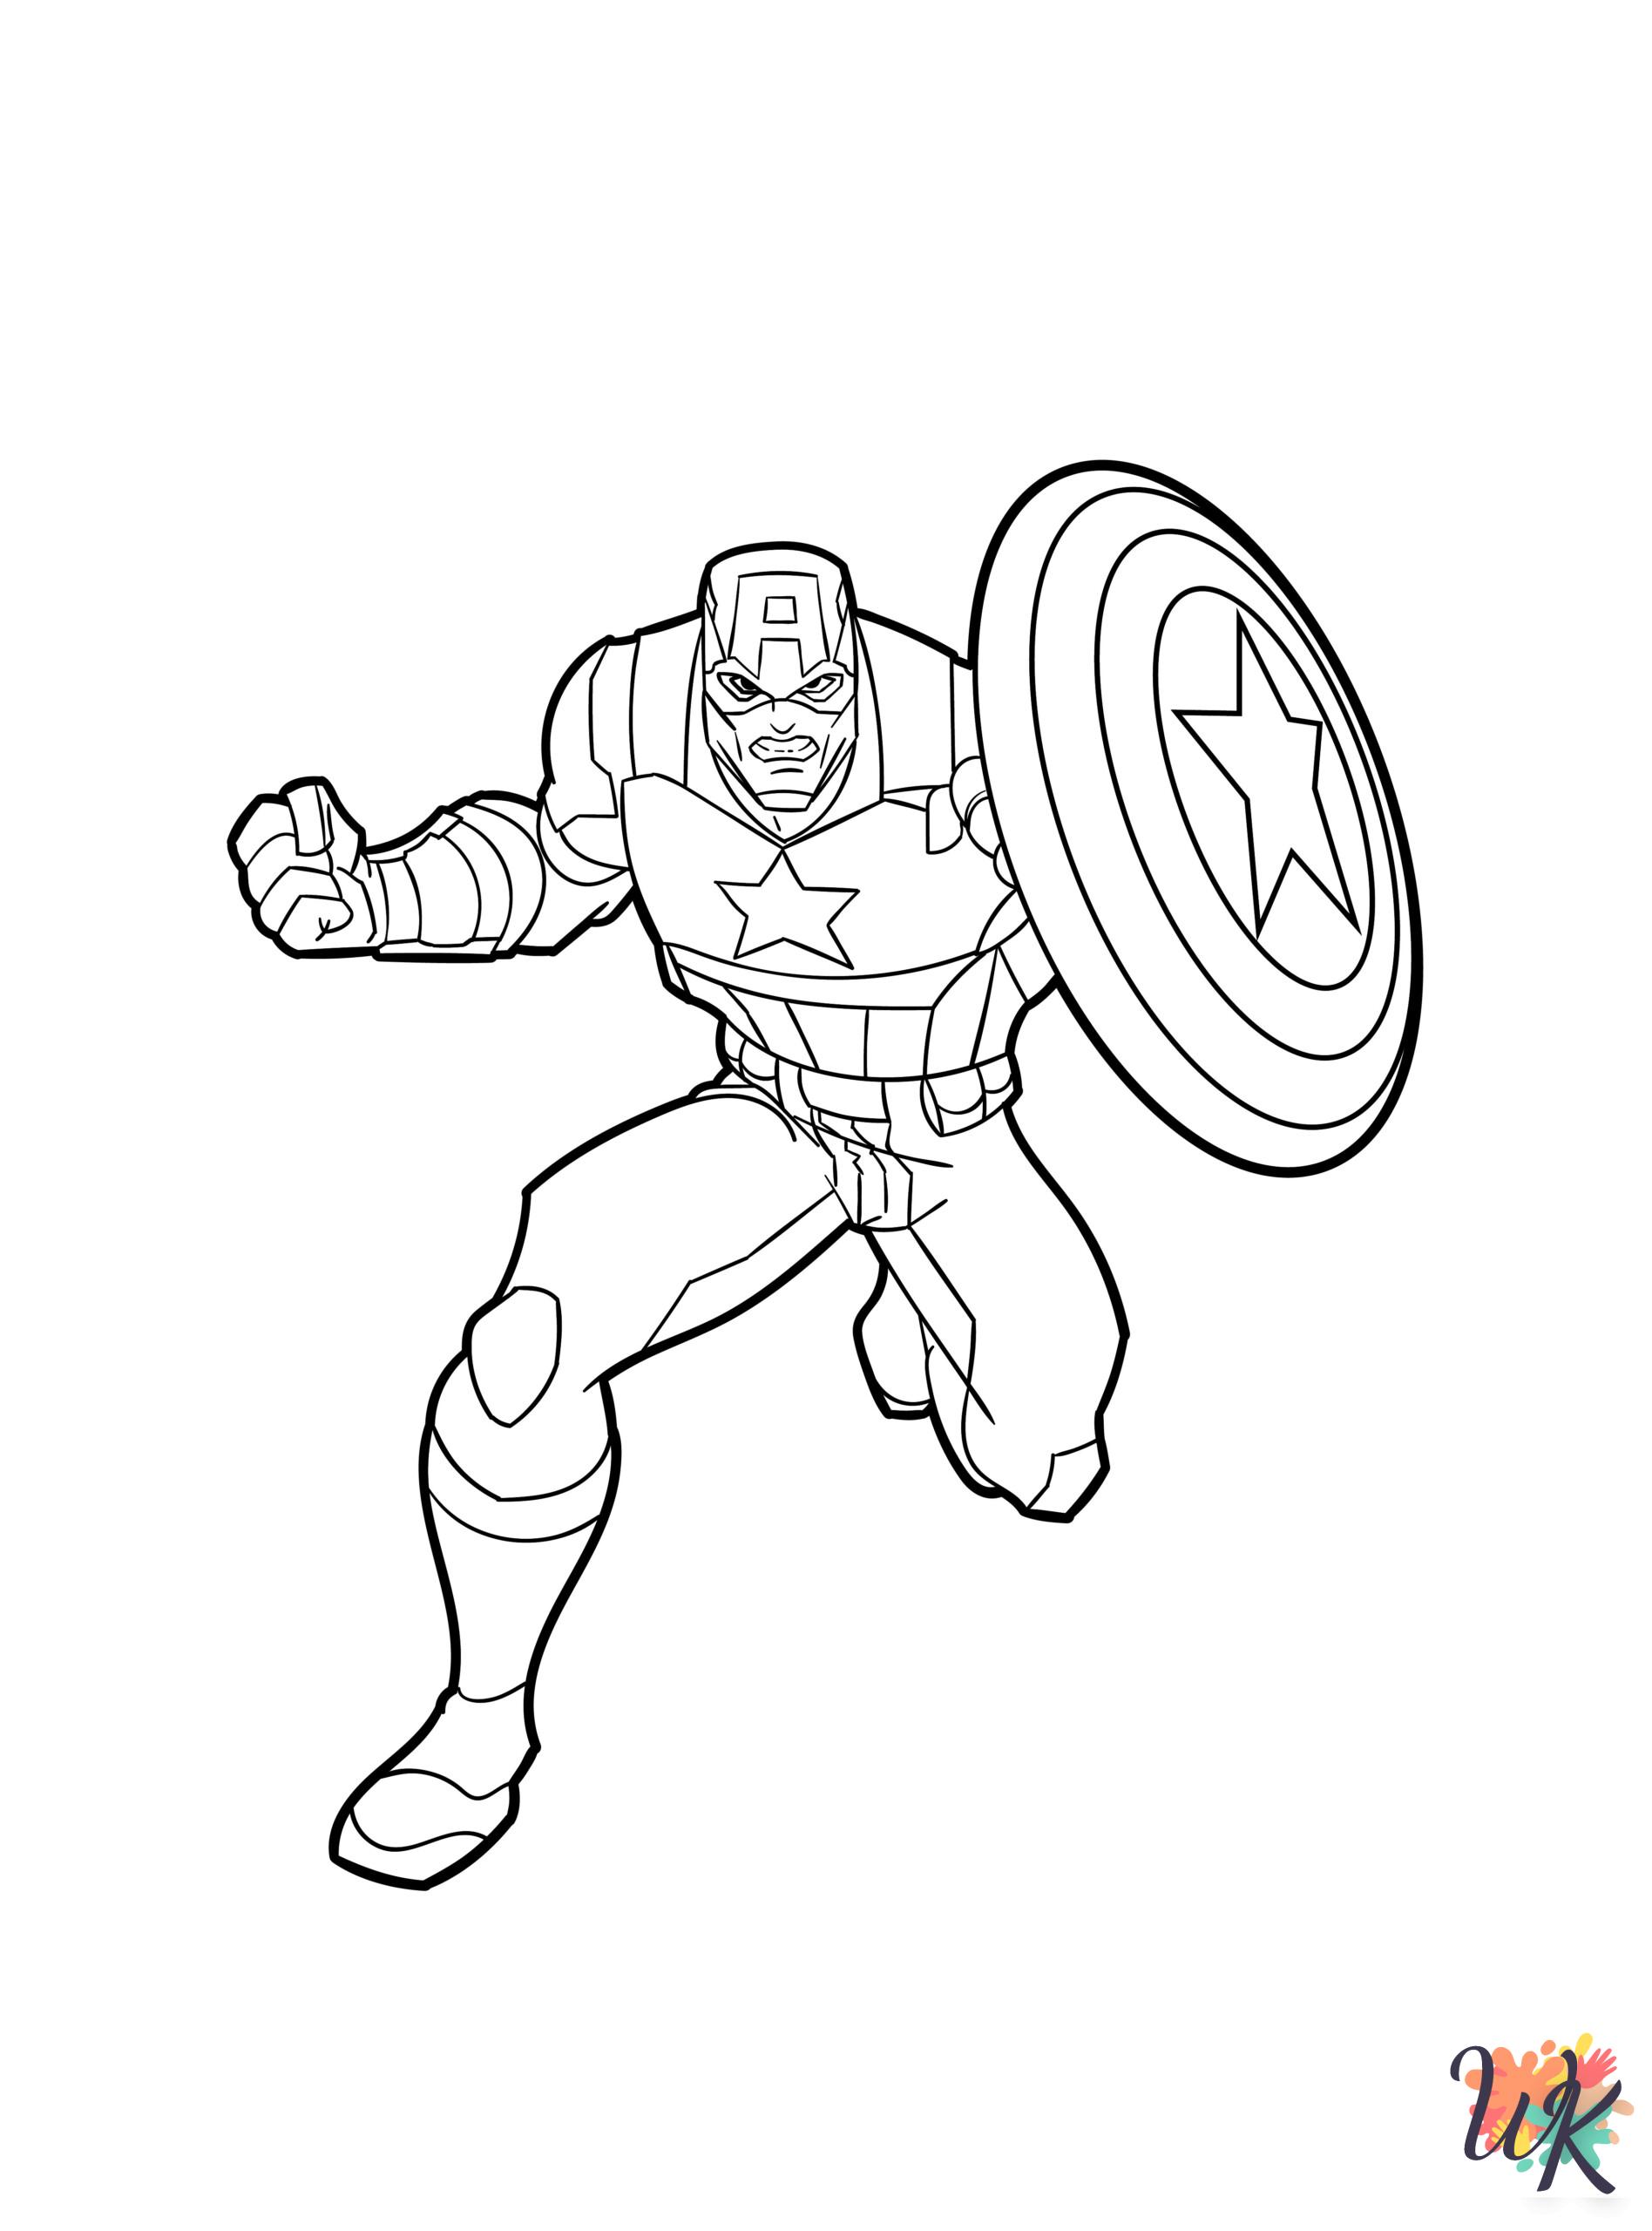 Superhero coloring pages easy